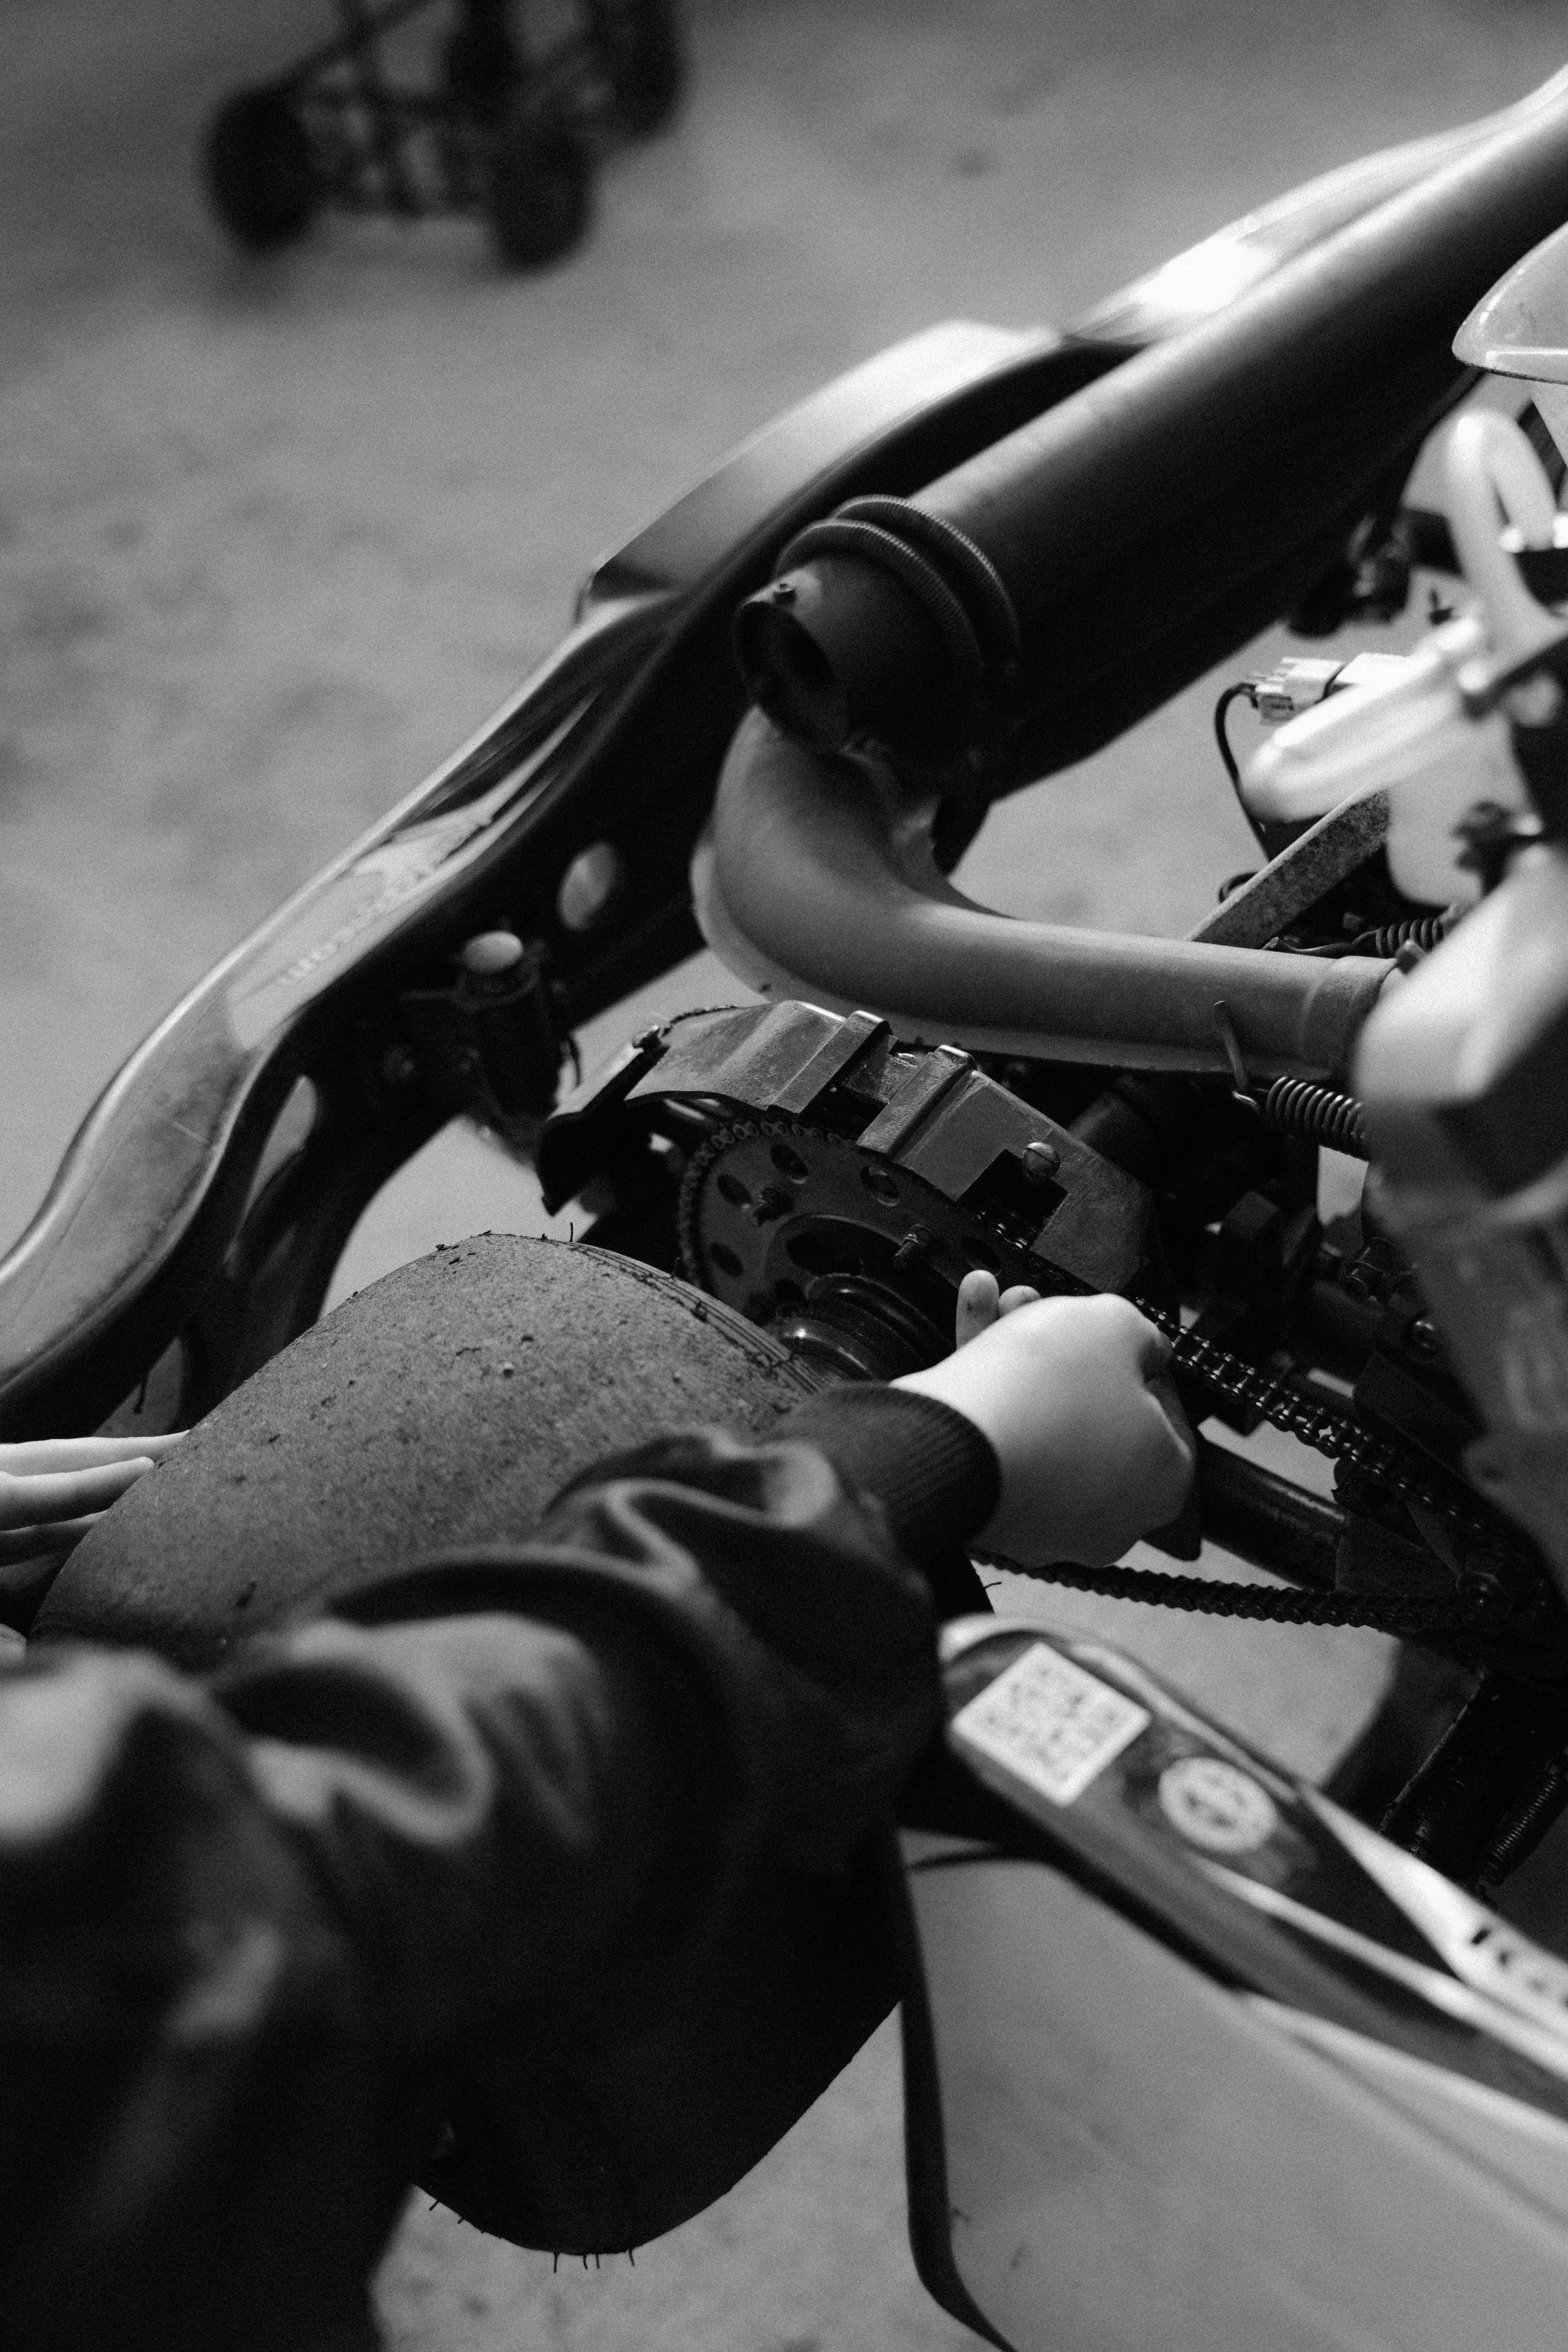 grayscale photo of person riding motorcycle